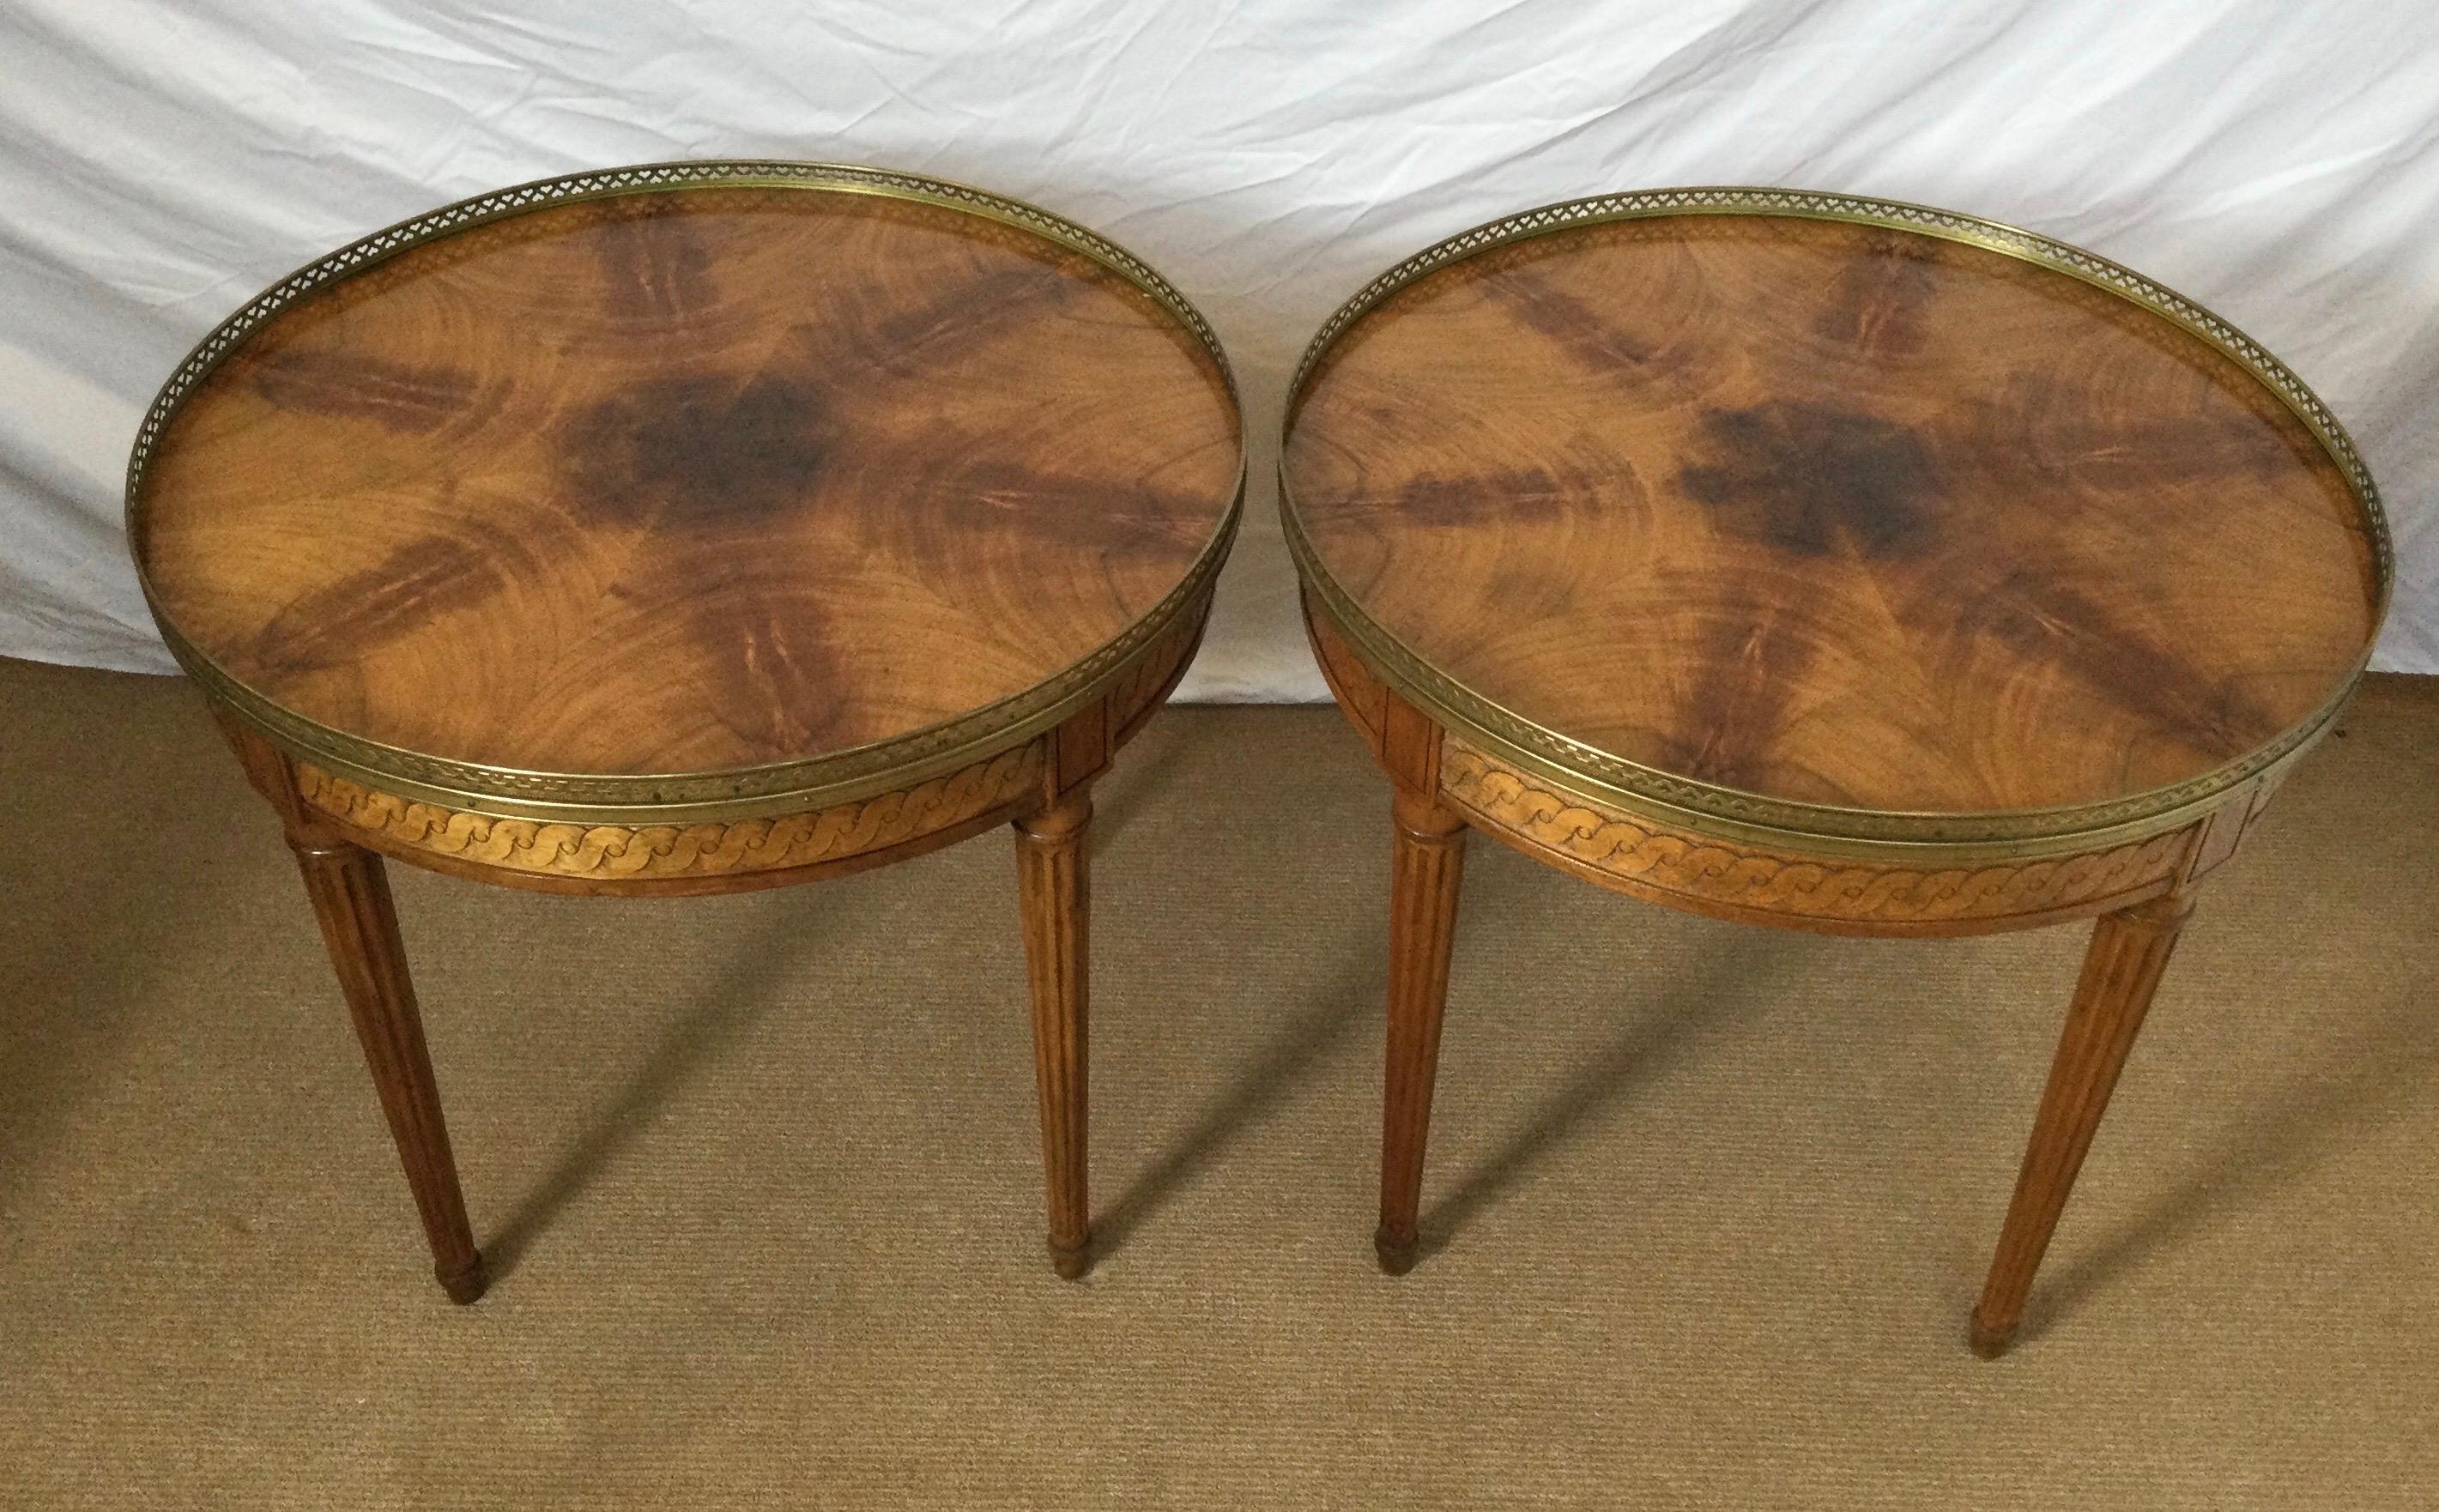 A pair of Baker Furniture round gallery edge table in a light walnut. The tops with book matched highly figurative walnut veneer with a pierced brass gallery edge with reeded louis XVI style legs.